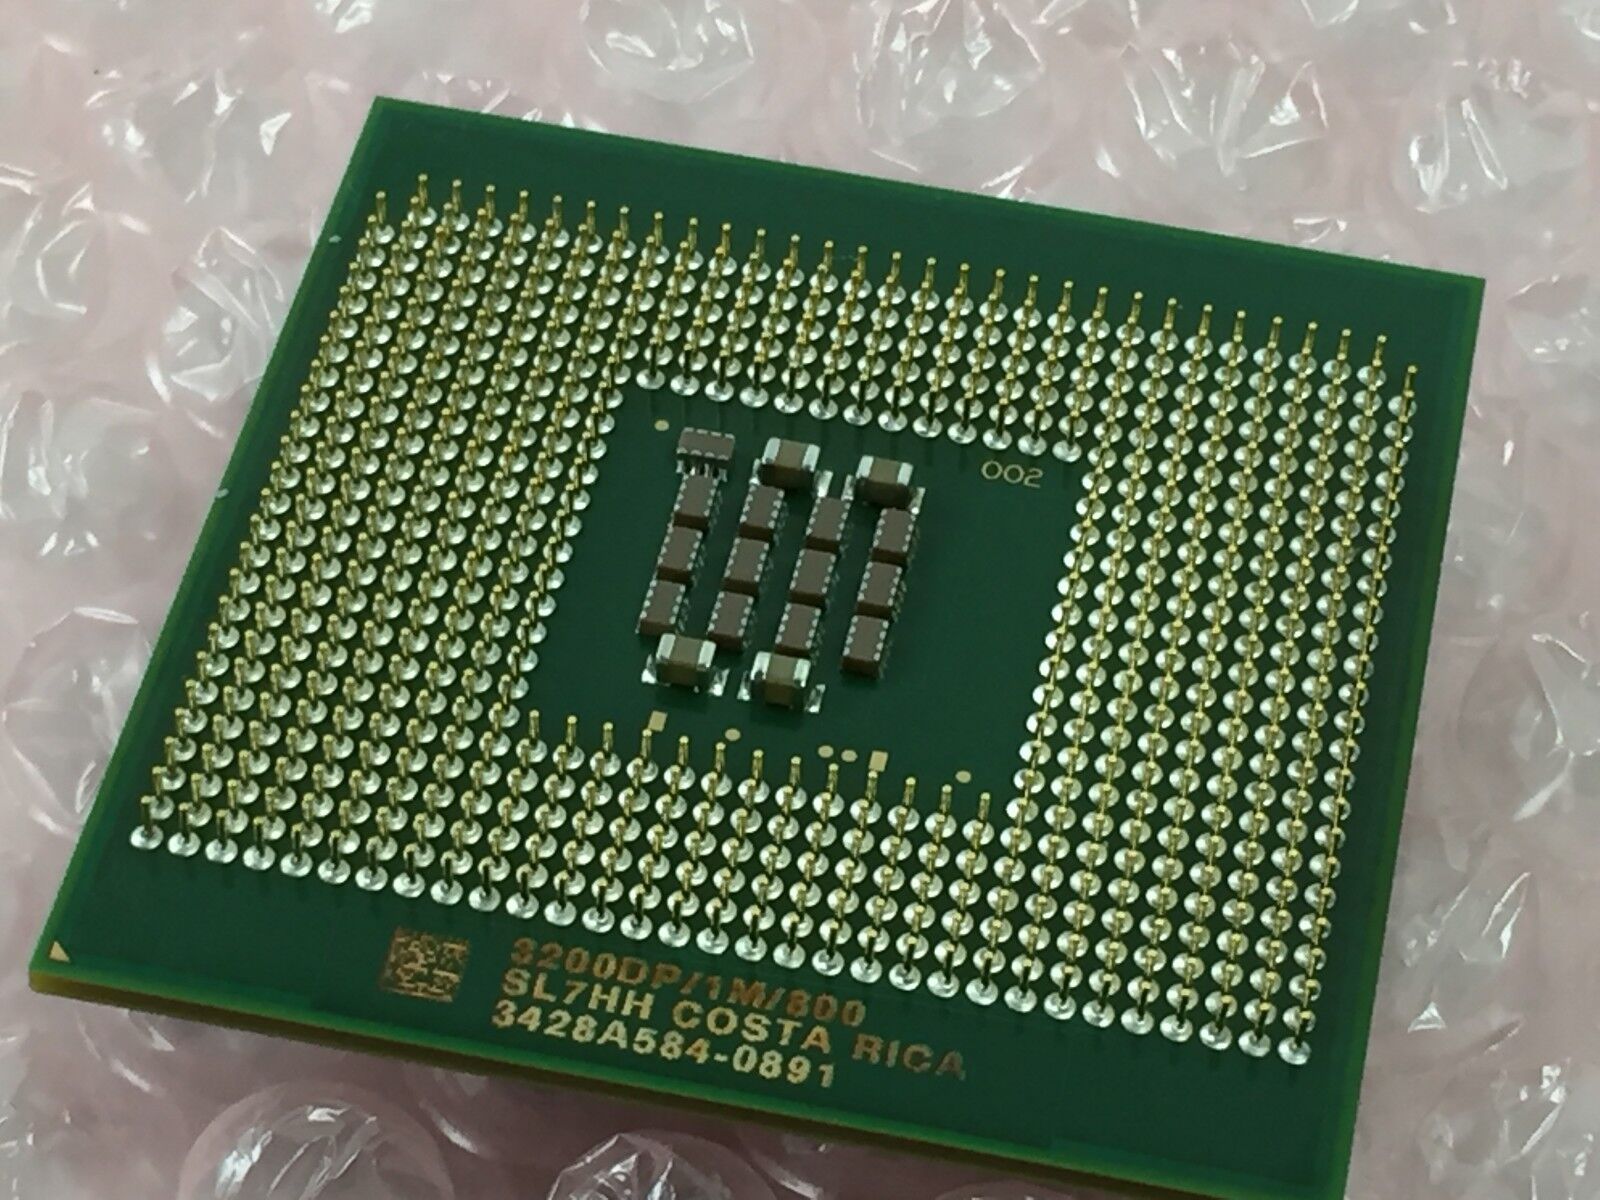 INTEL XEON 3200DP/IM/800 PROCESSOR out of 2400 Server